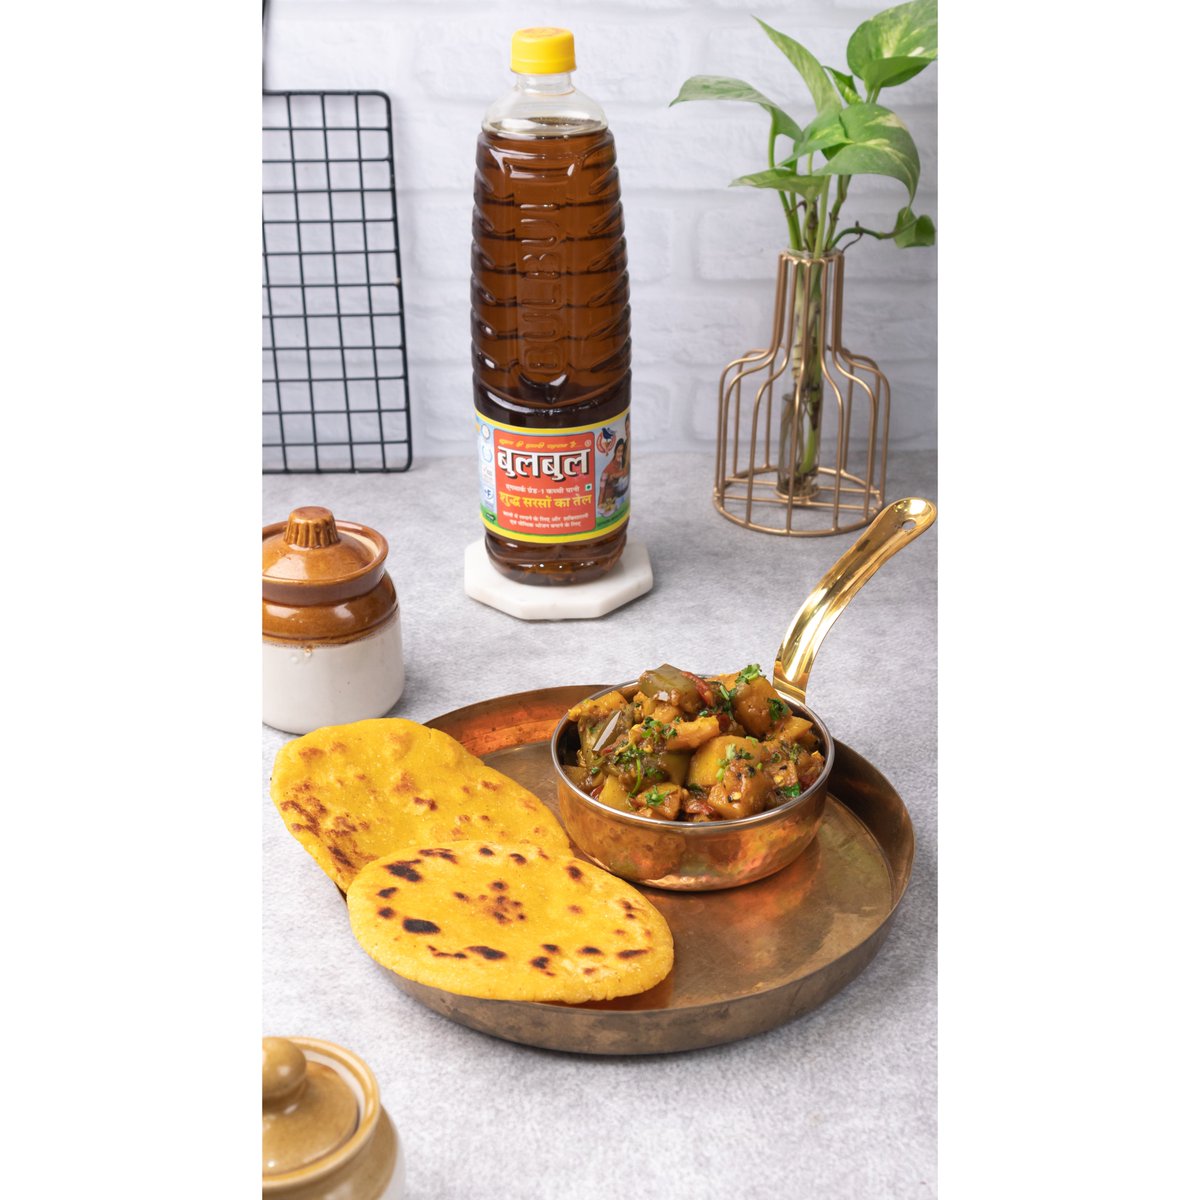 Add a touch of zing with mustard oil’s bold flavor!”😍✨
From @bulbul_oils

You can get your stack of Mustard oil for this season from bulbuloils.com

#bulbuloils #yellowmustardoil #mustardoil #healthycooking #foodphotography #productphotoshoot #foodstyling